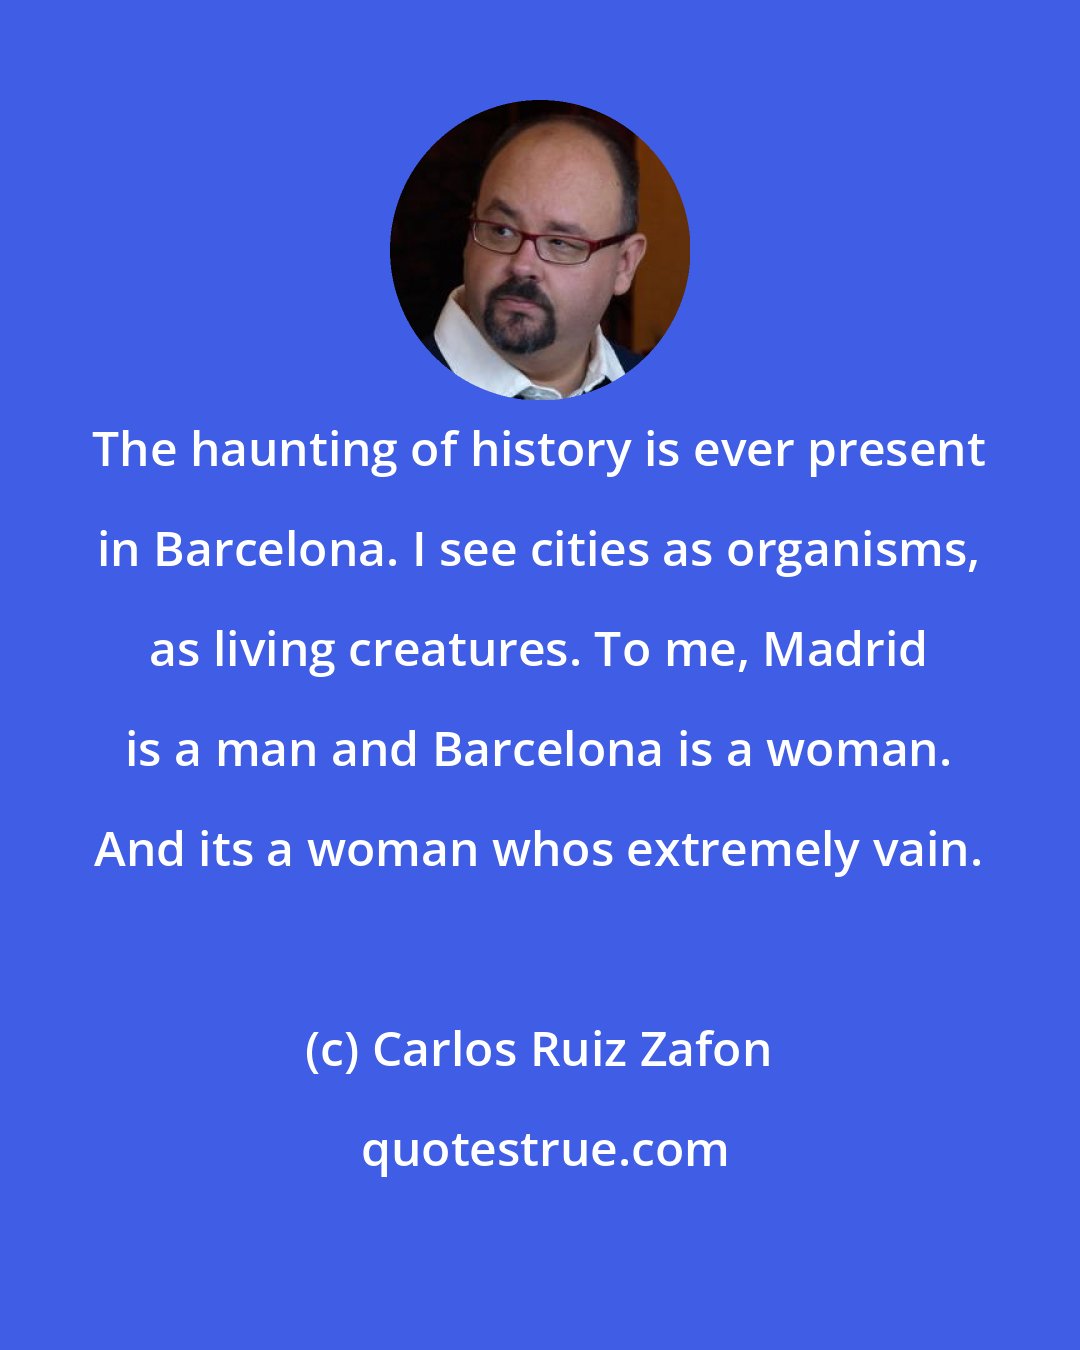 Carlos Ruiz Zafon: The haunting of history is ever present in Barcelona. I see cities as organisms, as living creatures. To me, Madrid is a man and Barcelona is a woman. And its a woman whos extremely vain.